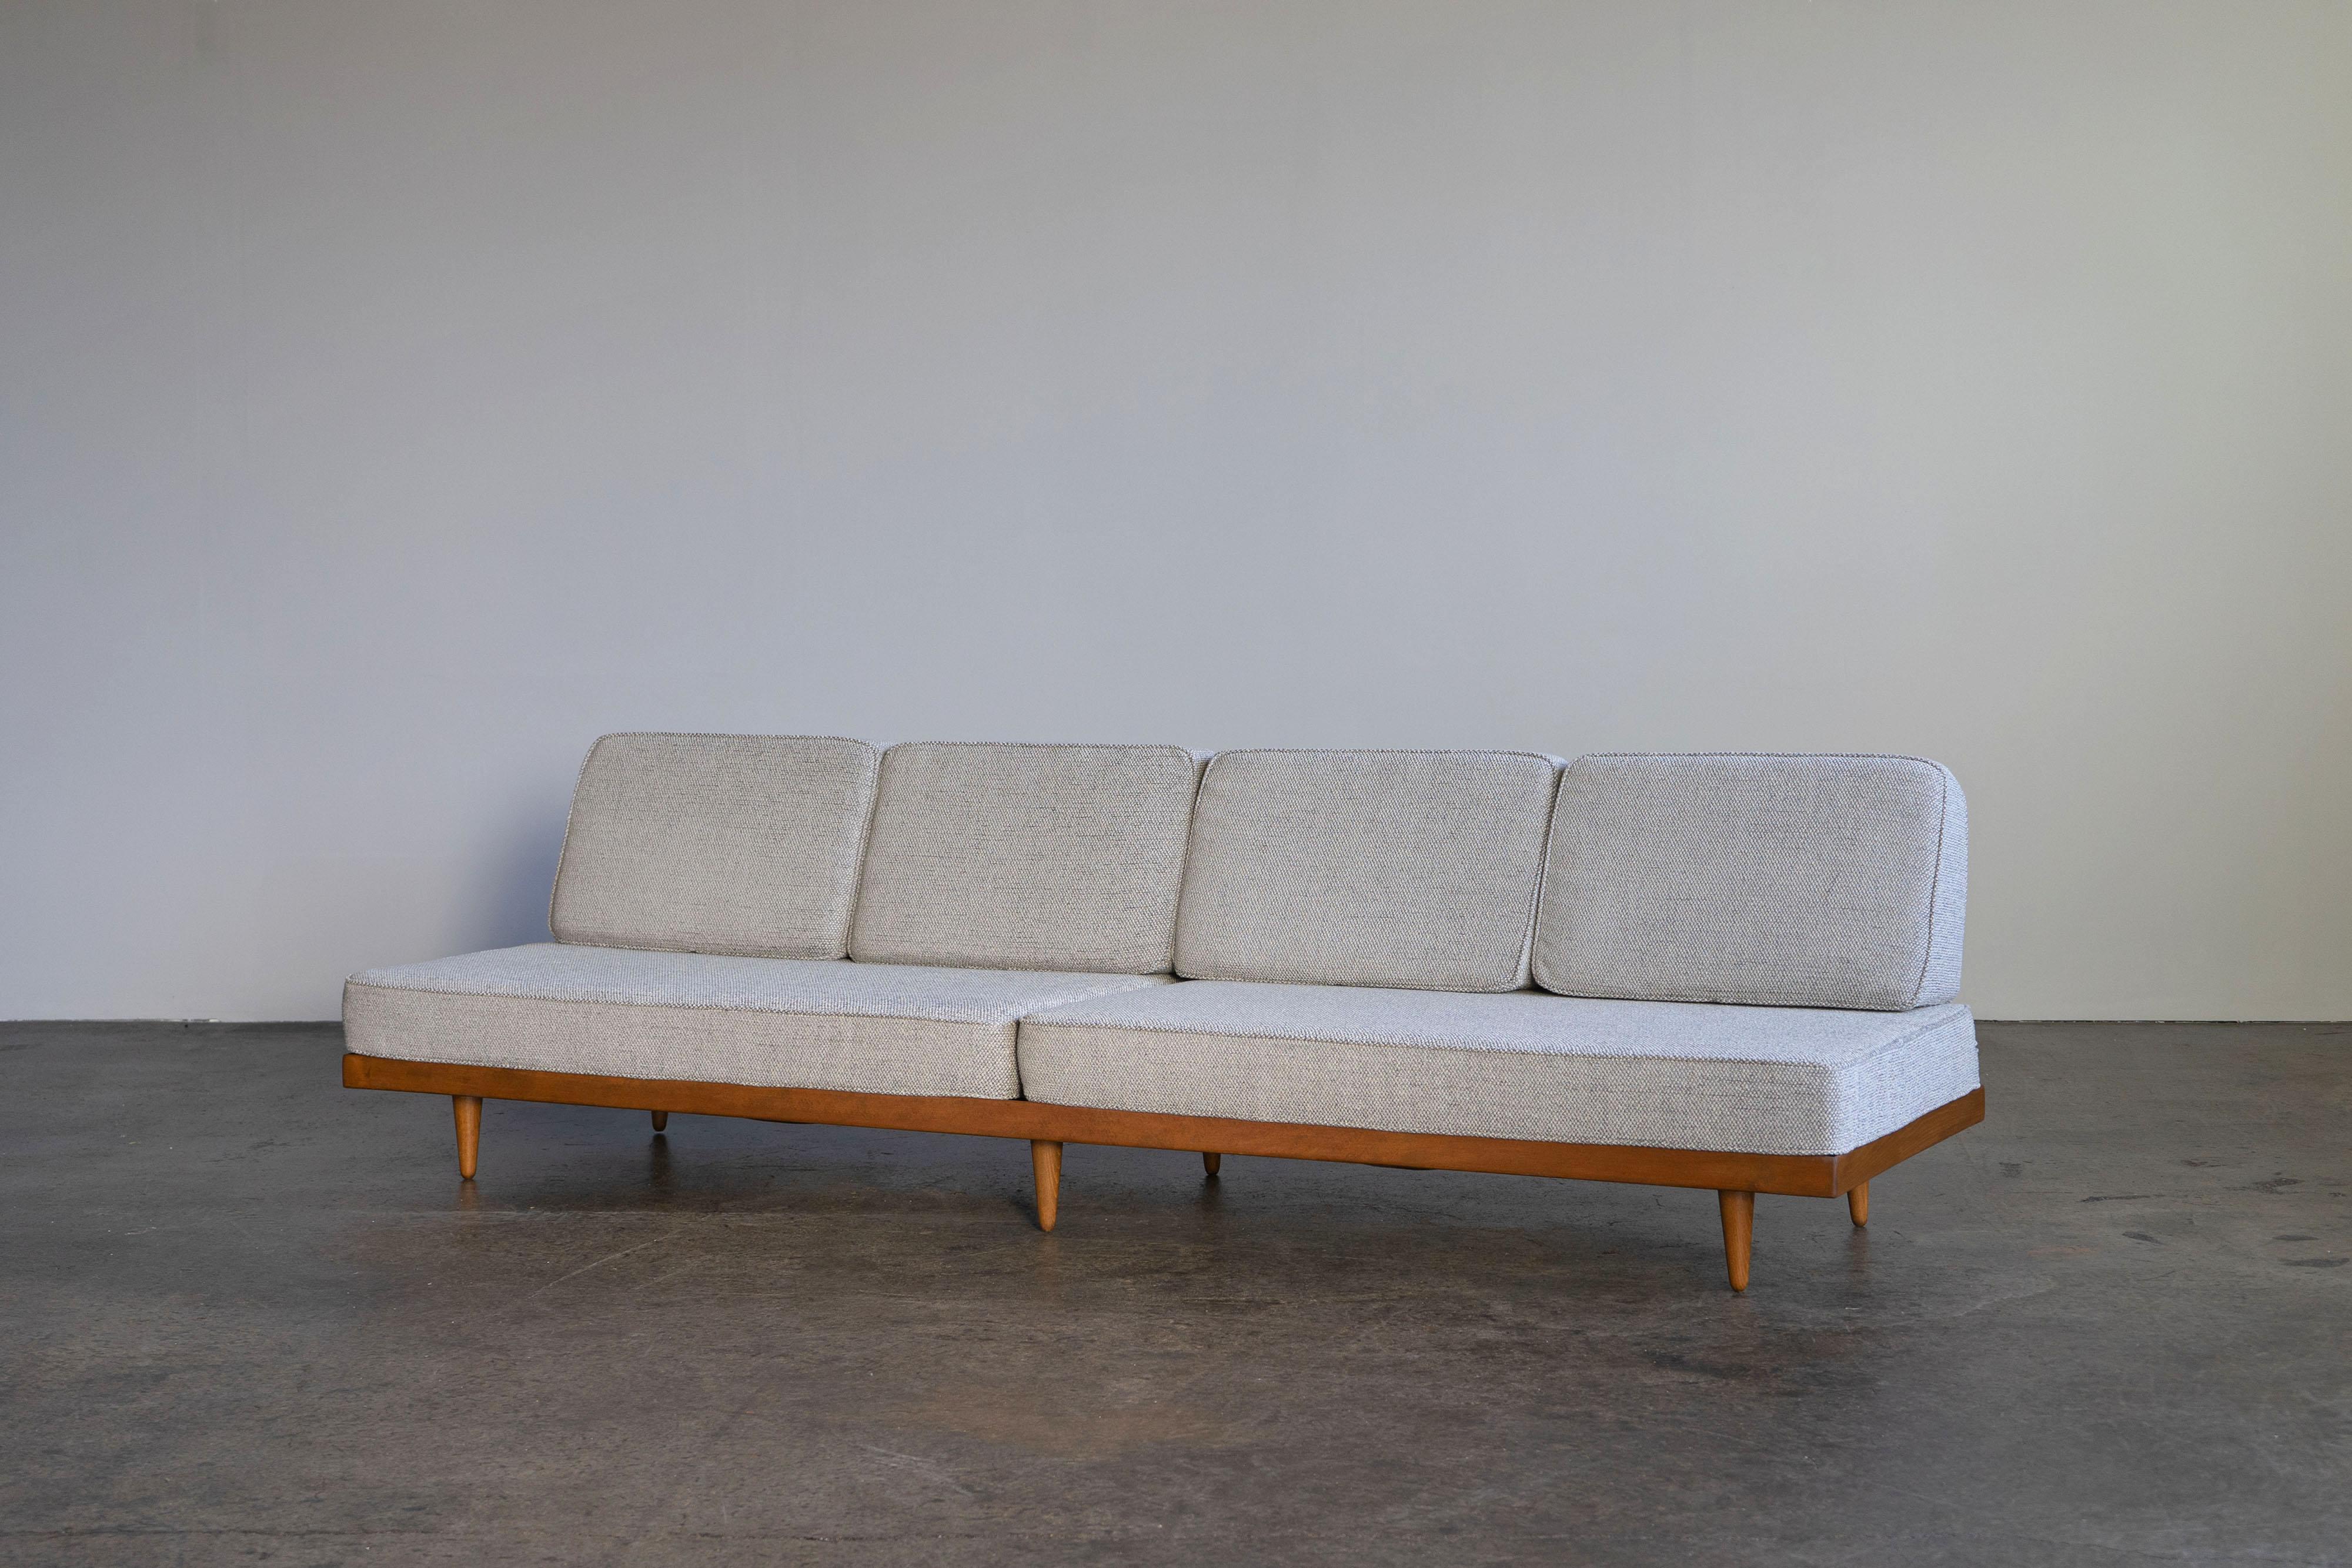 German Large Mid-Century Modern Daybed from the 1950s with Bouclé Fabric